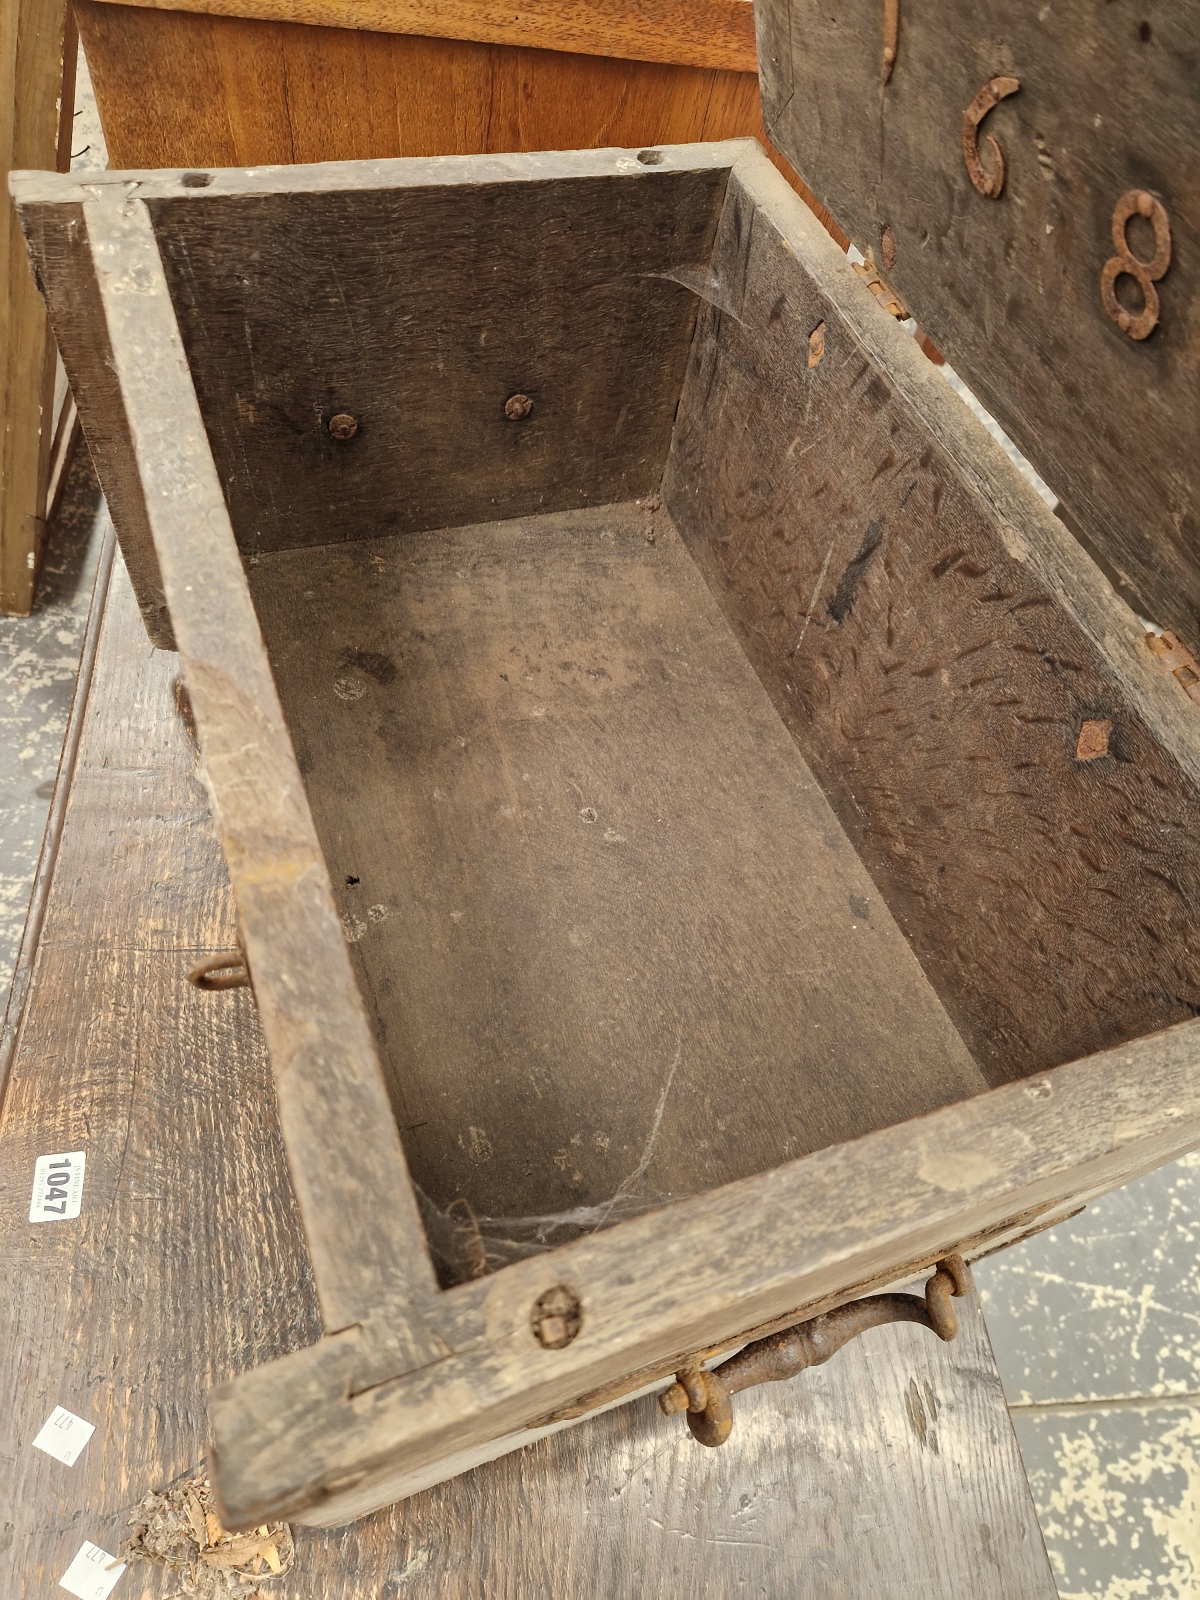 AN IRON BOUND TWO HANDLED OAK STRONG BOX BEARING THE DATE 1689 INSIDE THE HINGED LID - Image 6 of 7